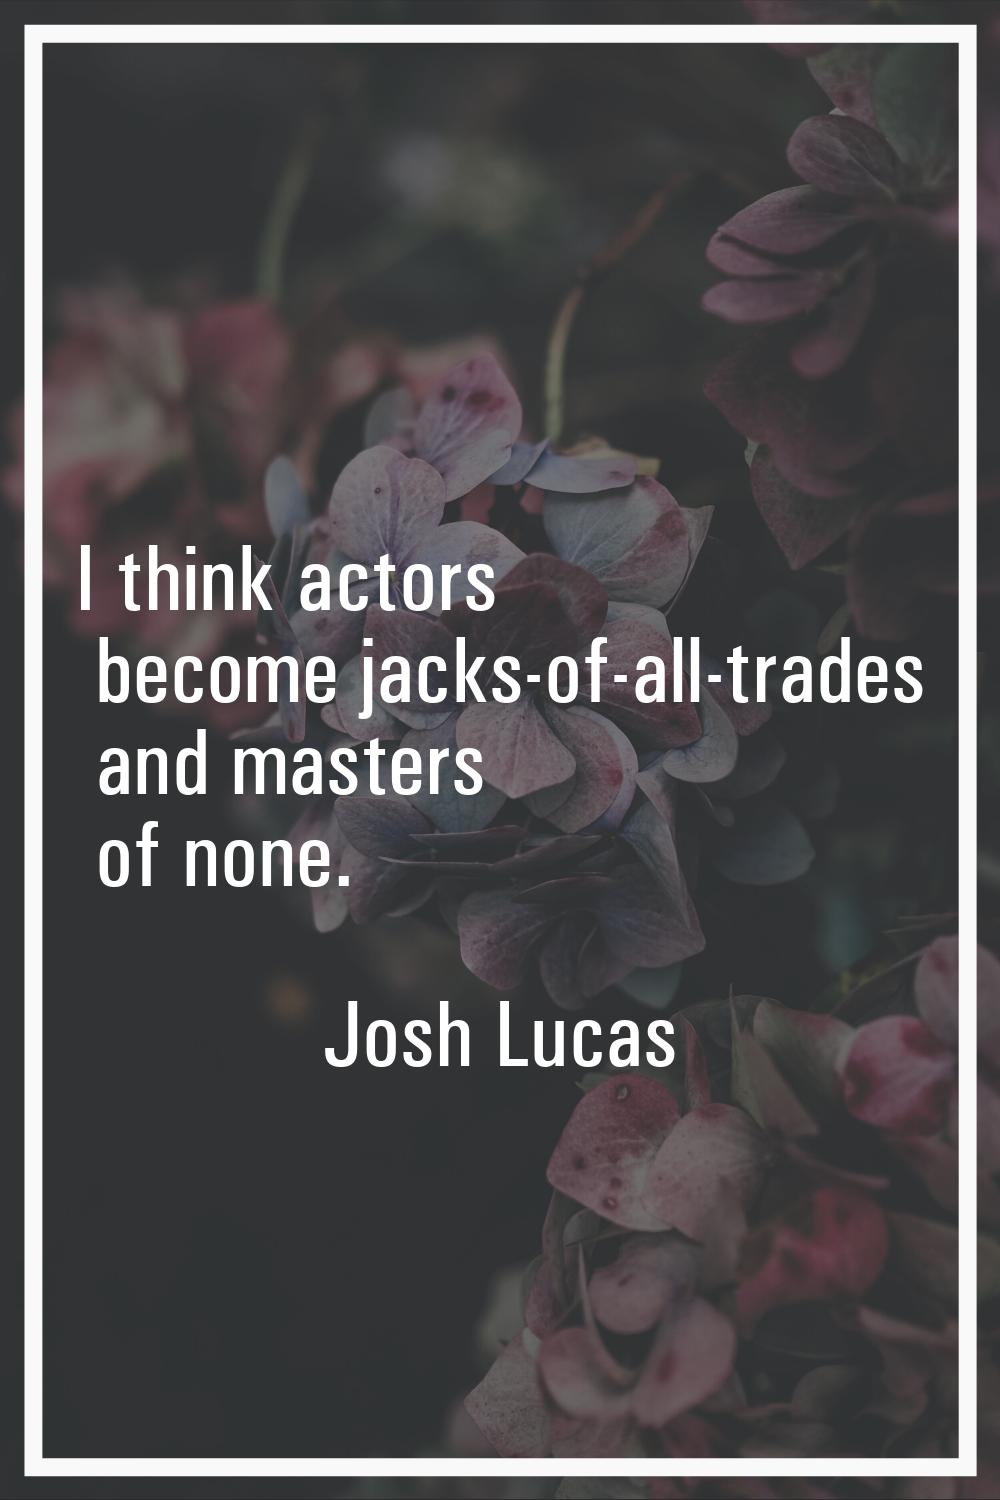 I think actors become jacks-of-all-trades and masters of none.